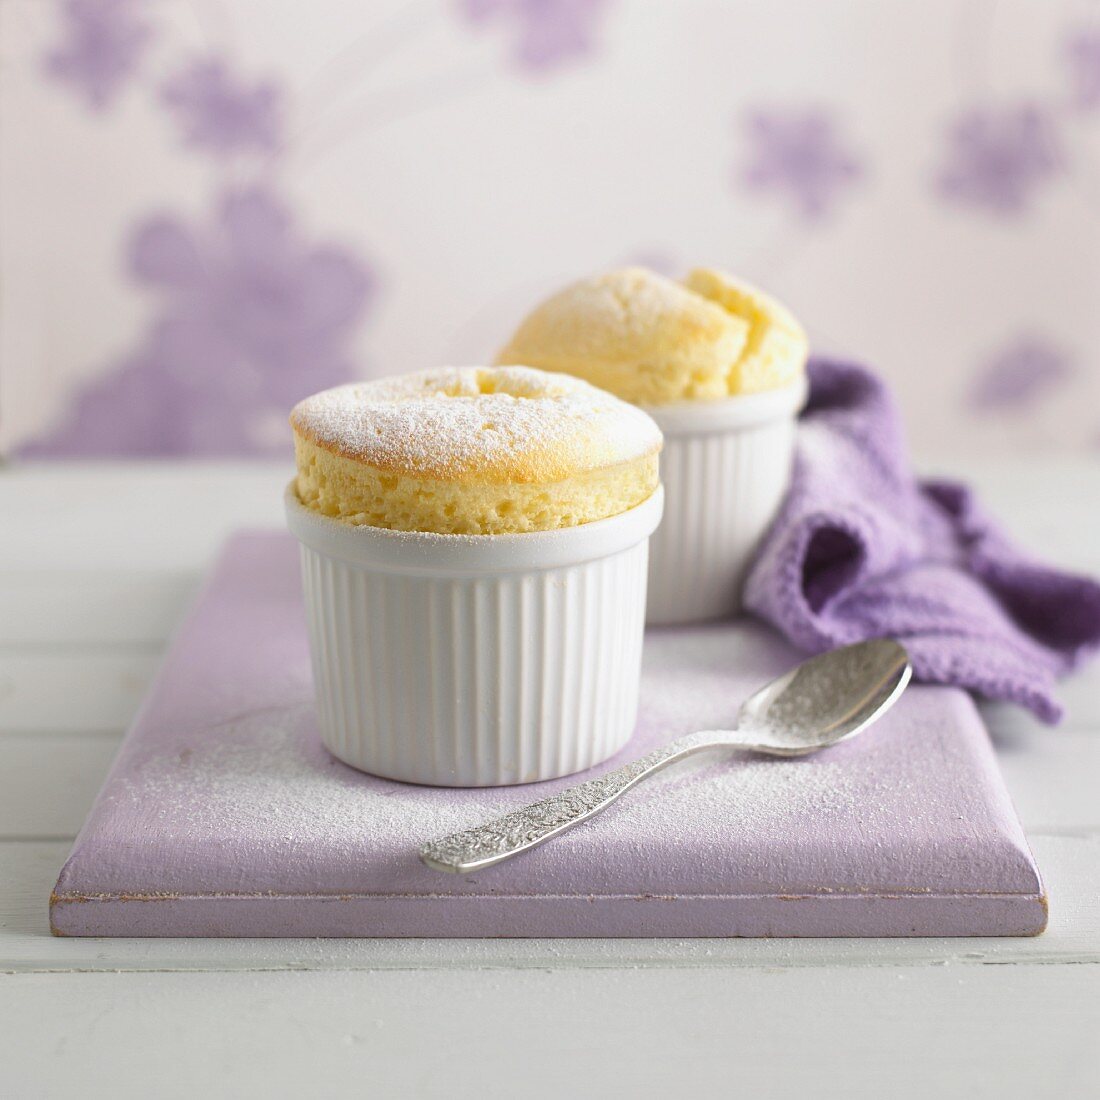 Lemon soufflé dusted with icing sugar